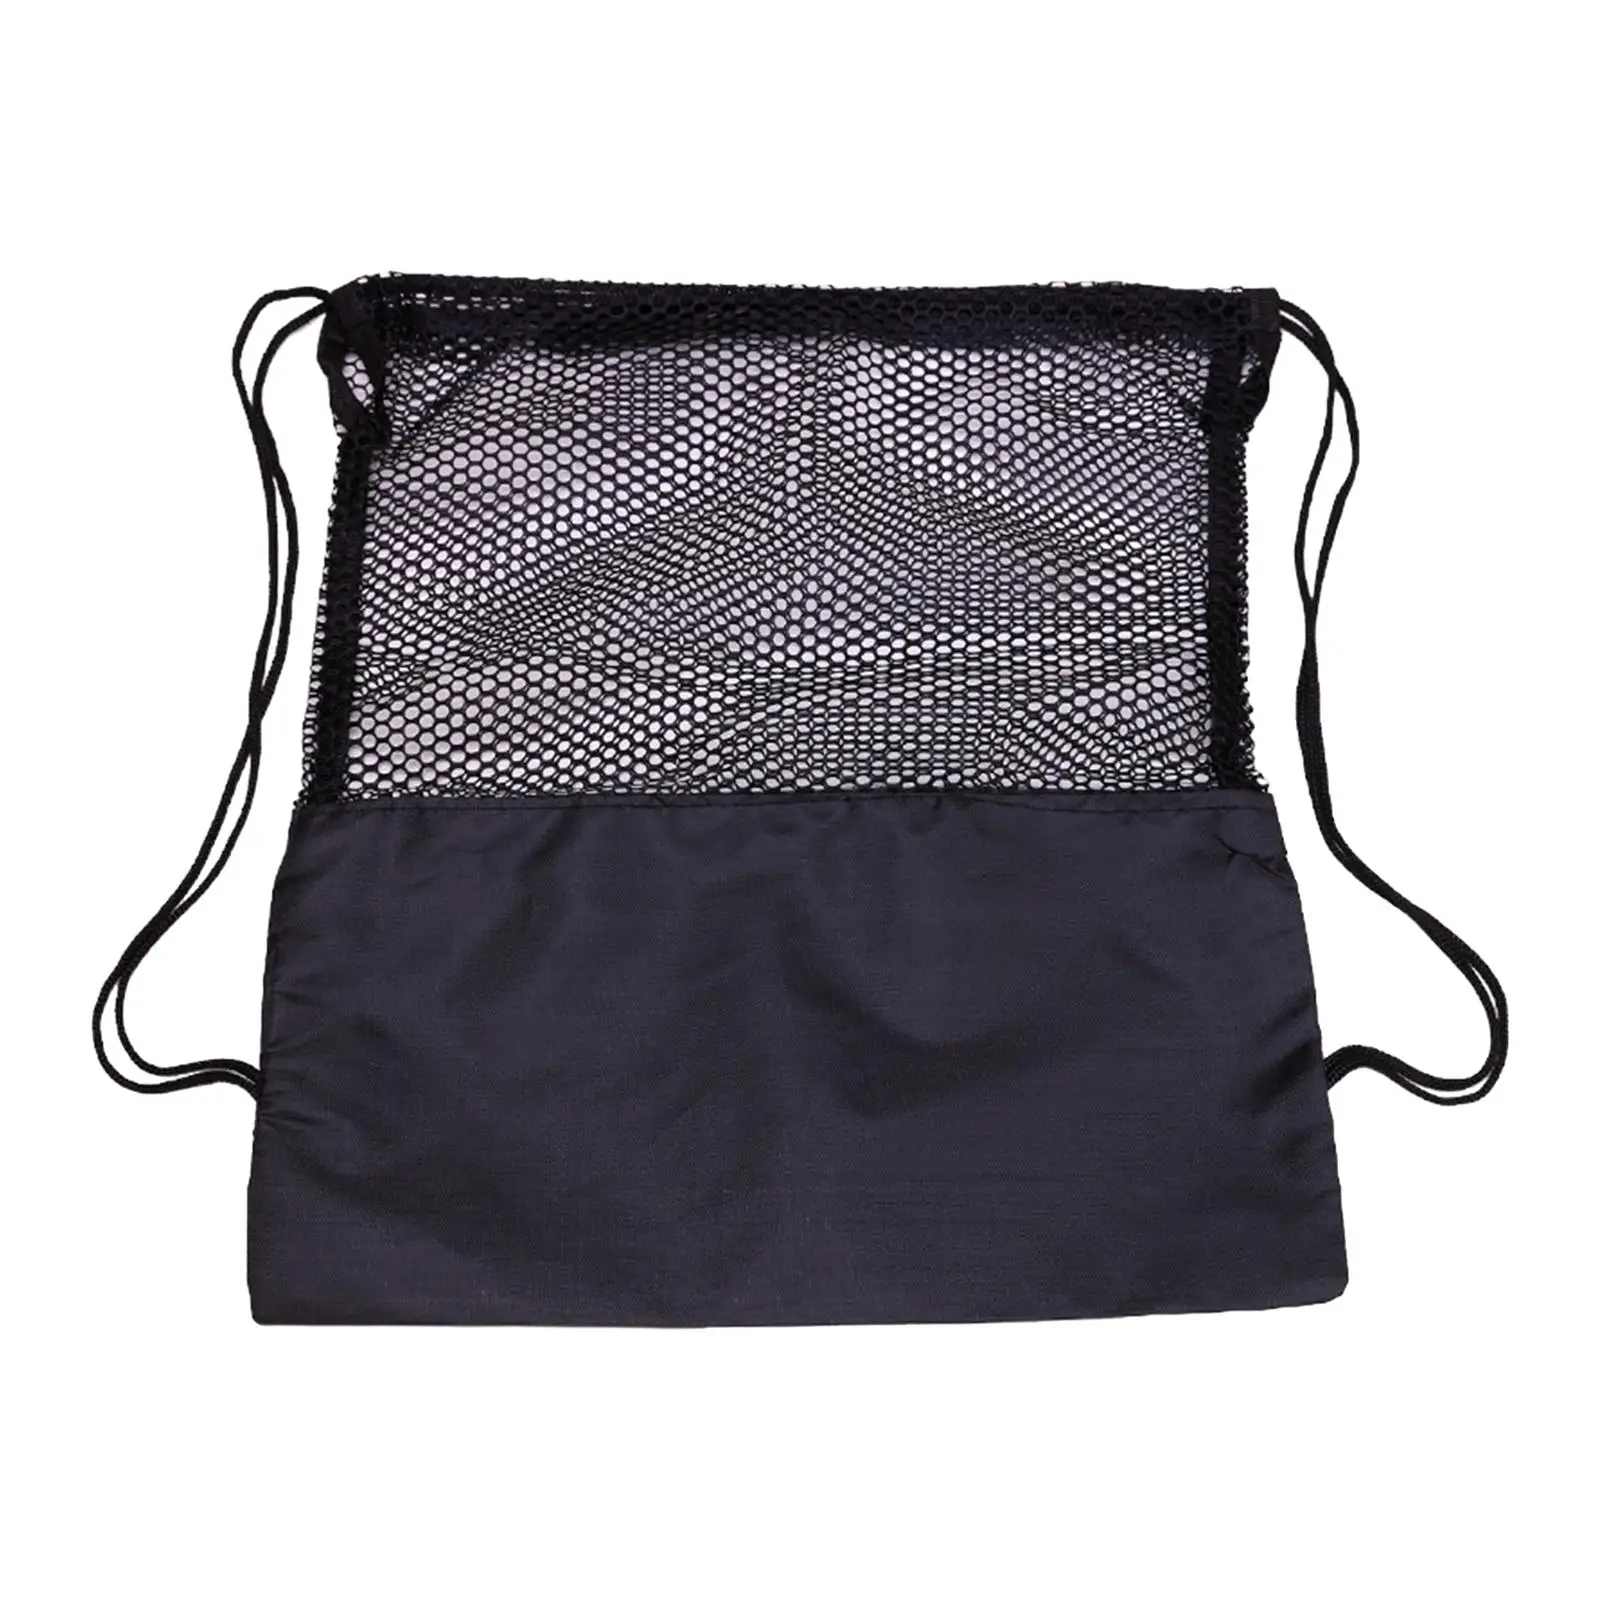 Basketball Mesh Bag Sackpack Wear Resistant Casual Day Pack Drawstring Backpack for Softball Marathons Yoga Volleyball Dance